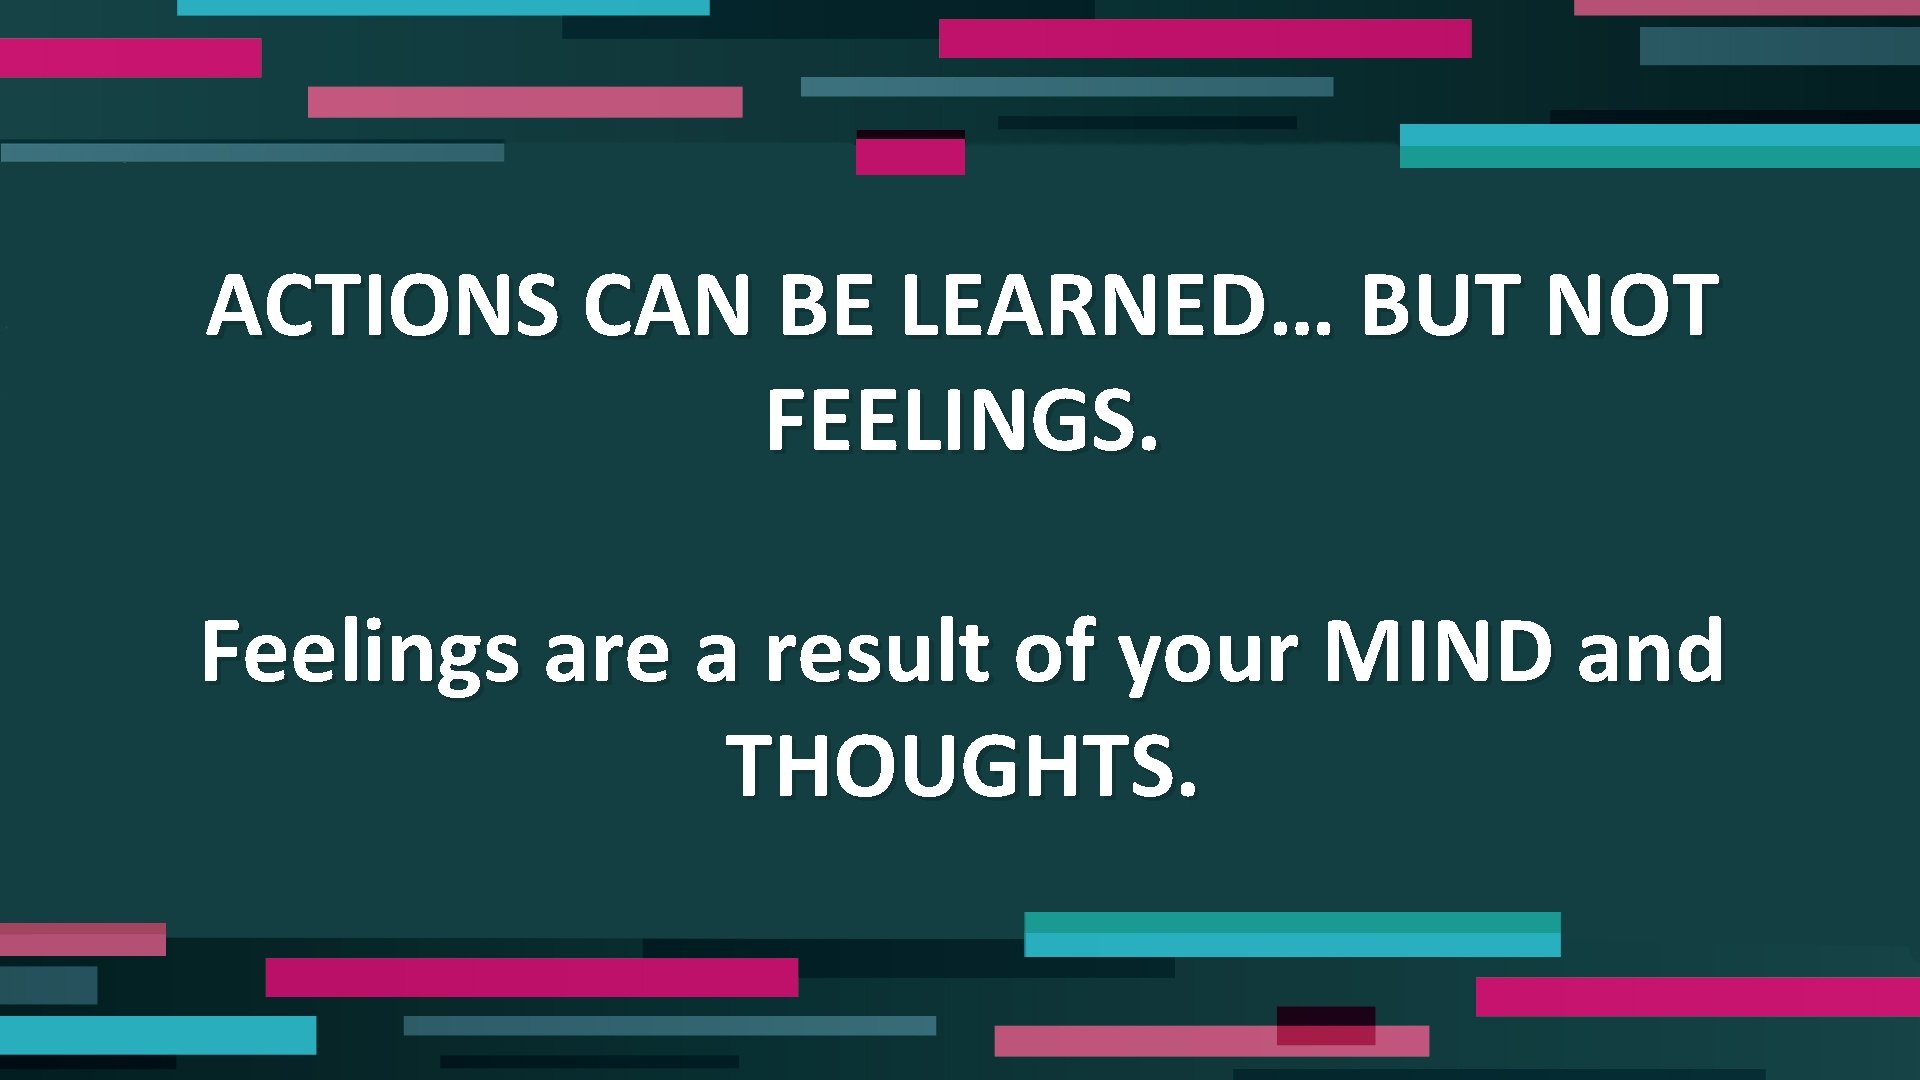 ACTIONS CAN BE LEARNED… BUT NOT FEELINGS. Feelings are a result of your MIND